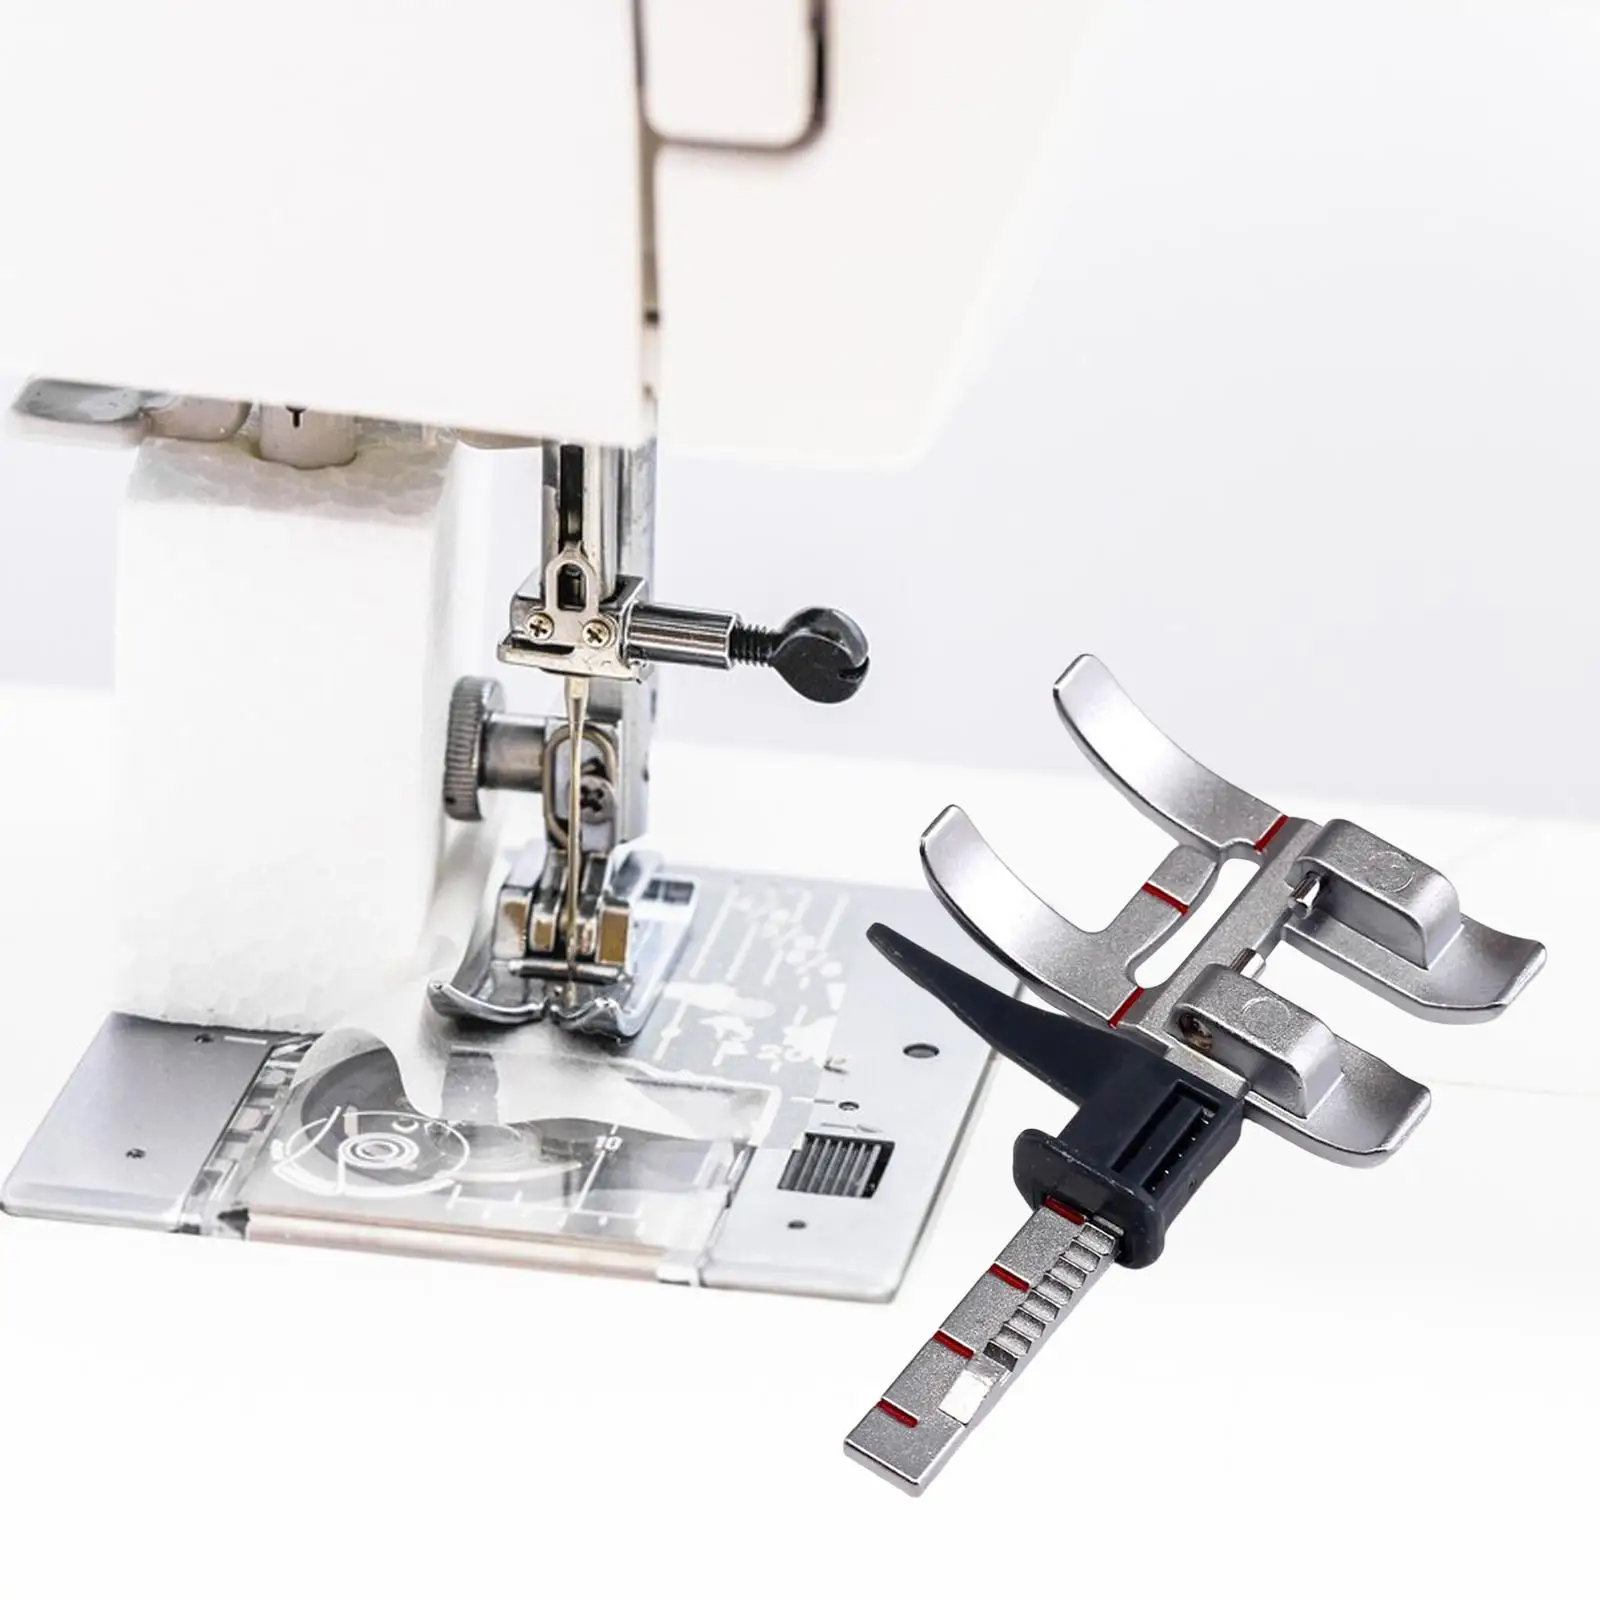 Adjustable Guide Foot for Idt System Precision Embroidery Presser Foot for Pfaff Sewing Machine Decorative Stitching Quilting